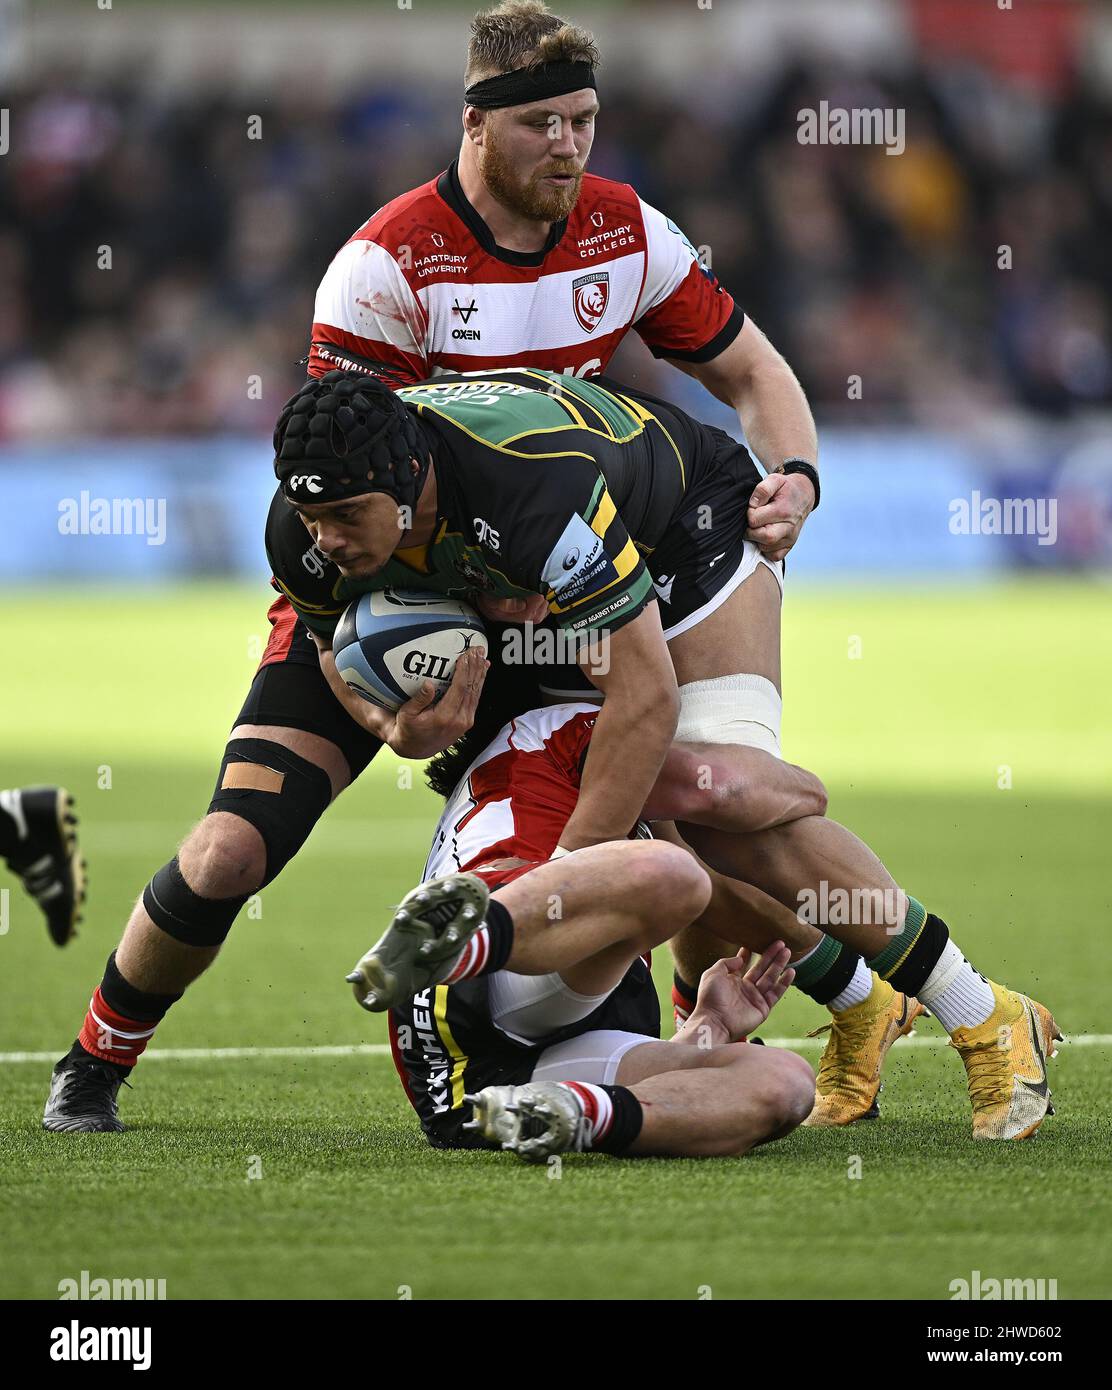 Gloucester, United Kingdom. 05th Mar, 2022. Premiership Rugby. Gloucester Rugby V Northampton Saints. Kingsholm Stadium. Gloucester. Juarno Augustus (Northampton Saints) is tackled by Santiago Socino (Gloucester Rugby, on ground) and Harry Elrington (Gloucester Rugby) during the Gloucester Rugby V Northampton Saints Gallagher Premiership rugby match. Credit: Sport In Pictures/Alamy Live News Stock Photo